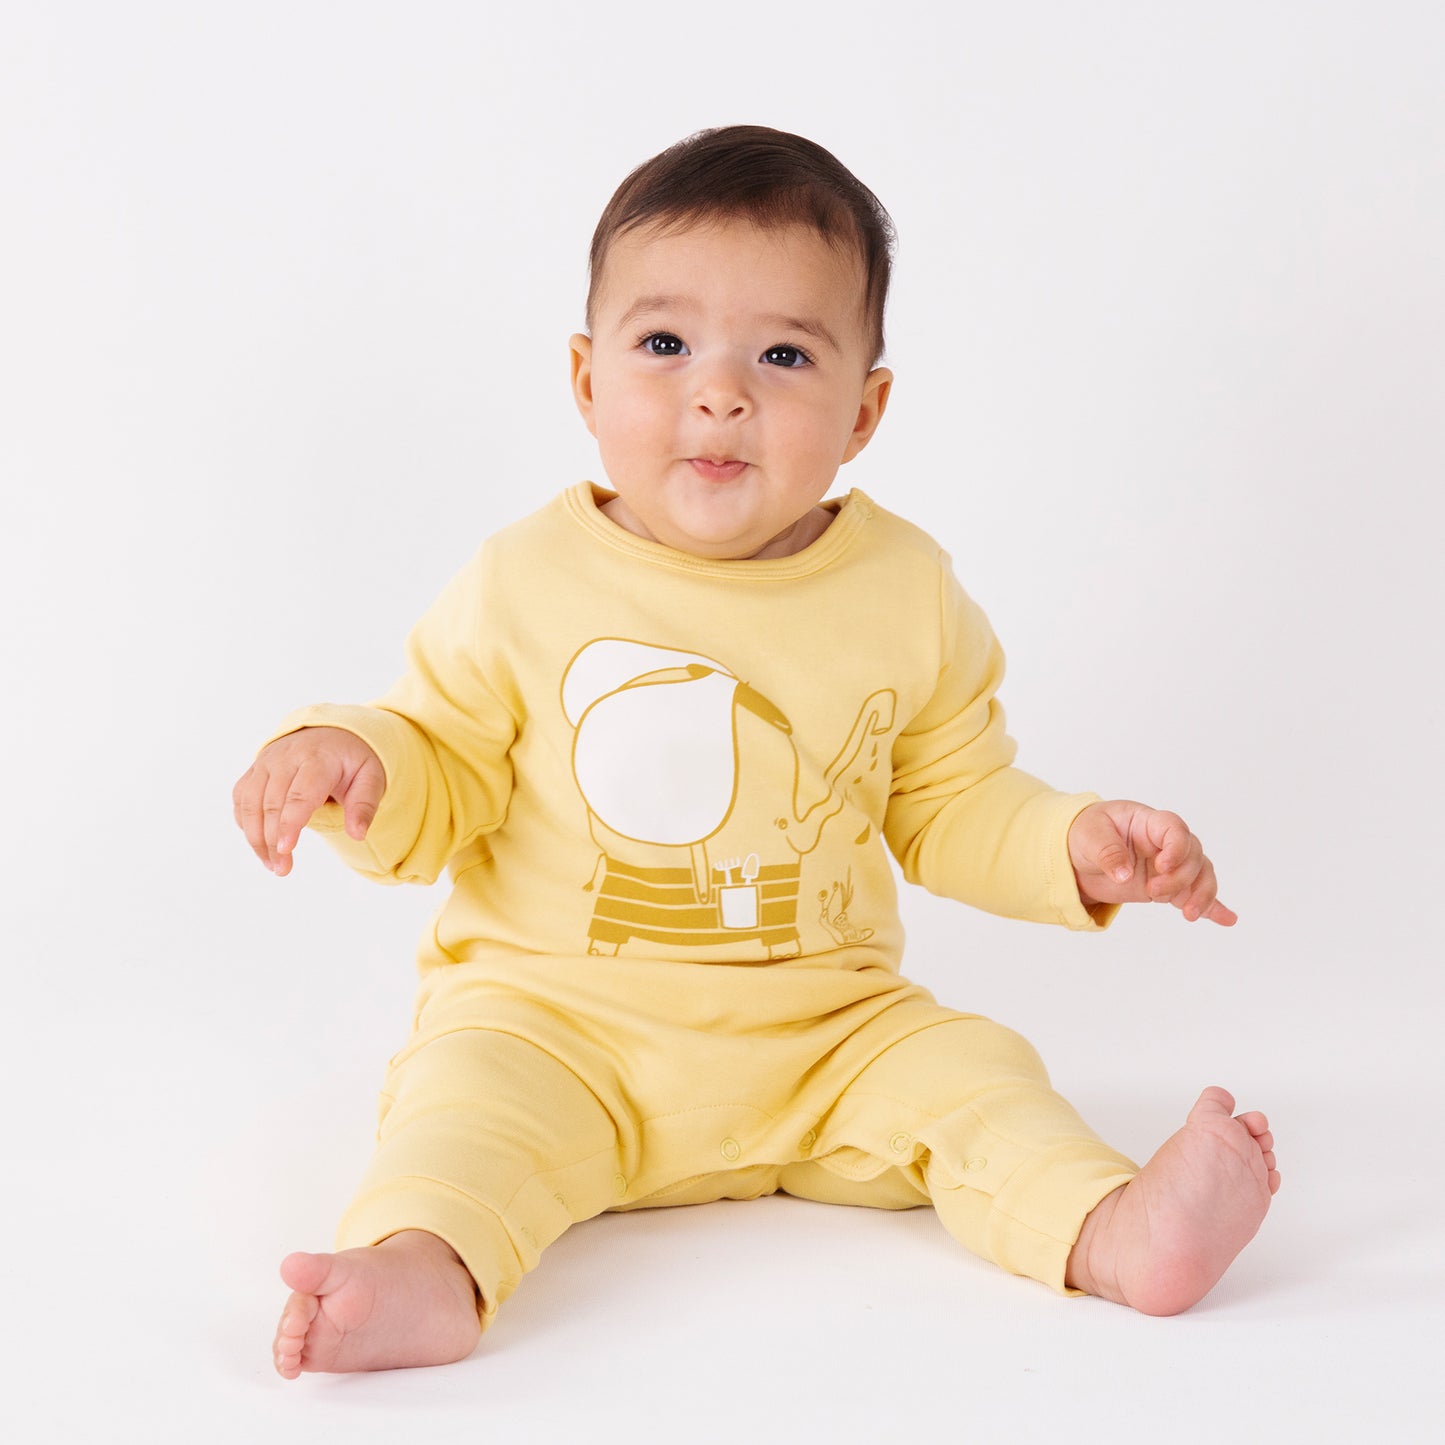 Organic Play Jumpsuit -Aged 3m to 18m- Colored Yellow